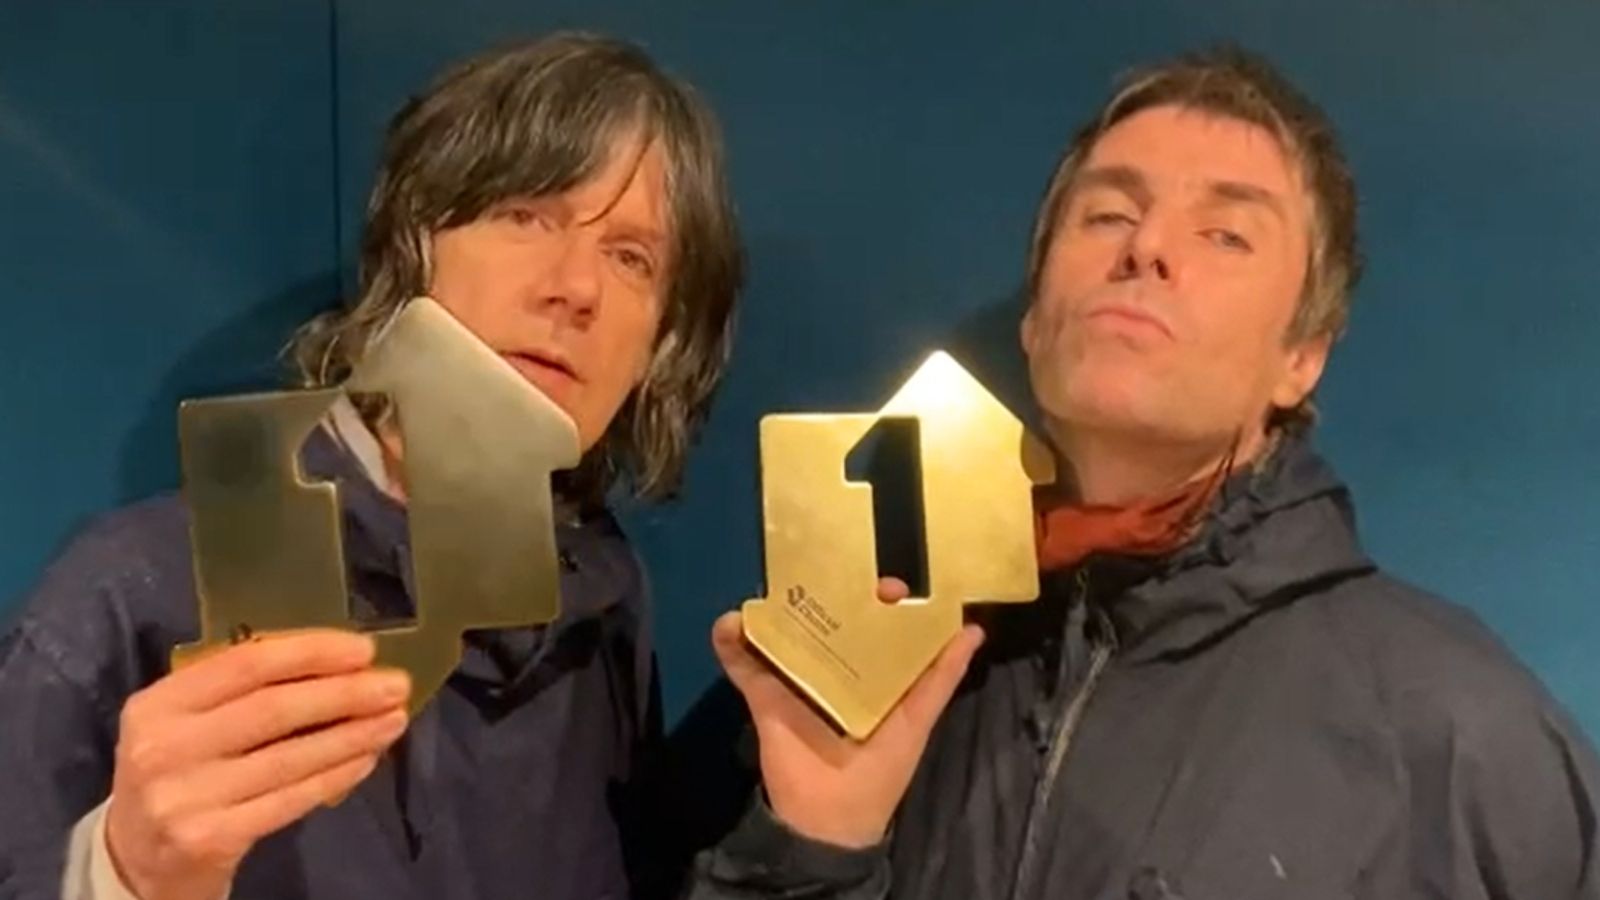 Oasis frontman Liam Gallagher and The Stone Roses guitarist John Squire land number one album with collaboration